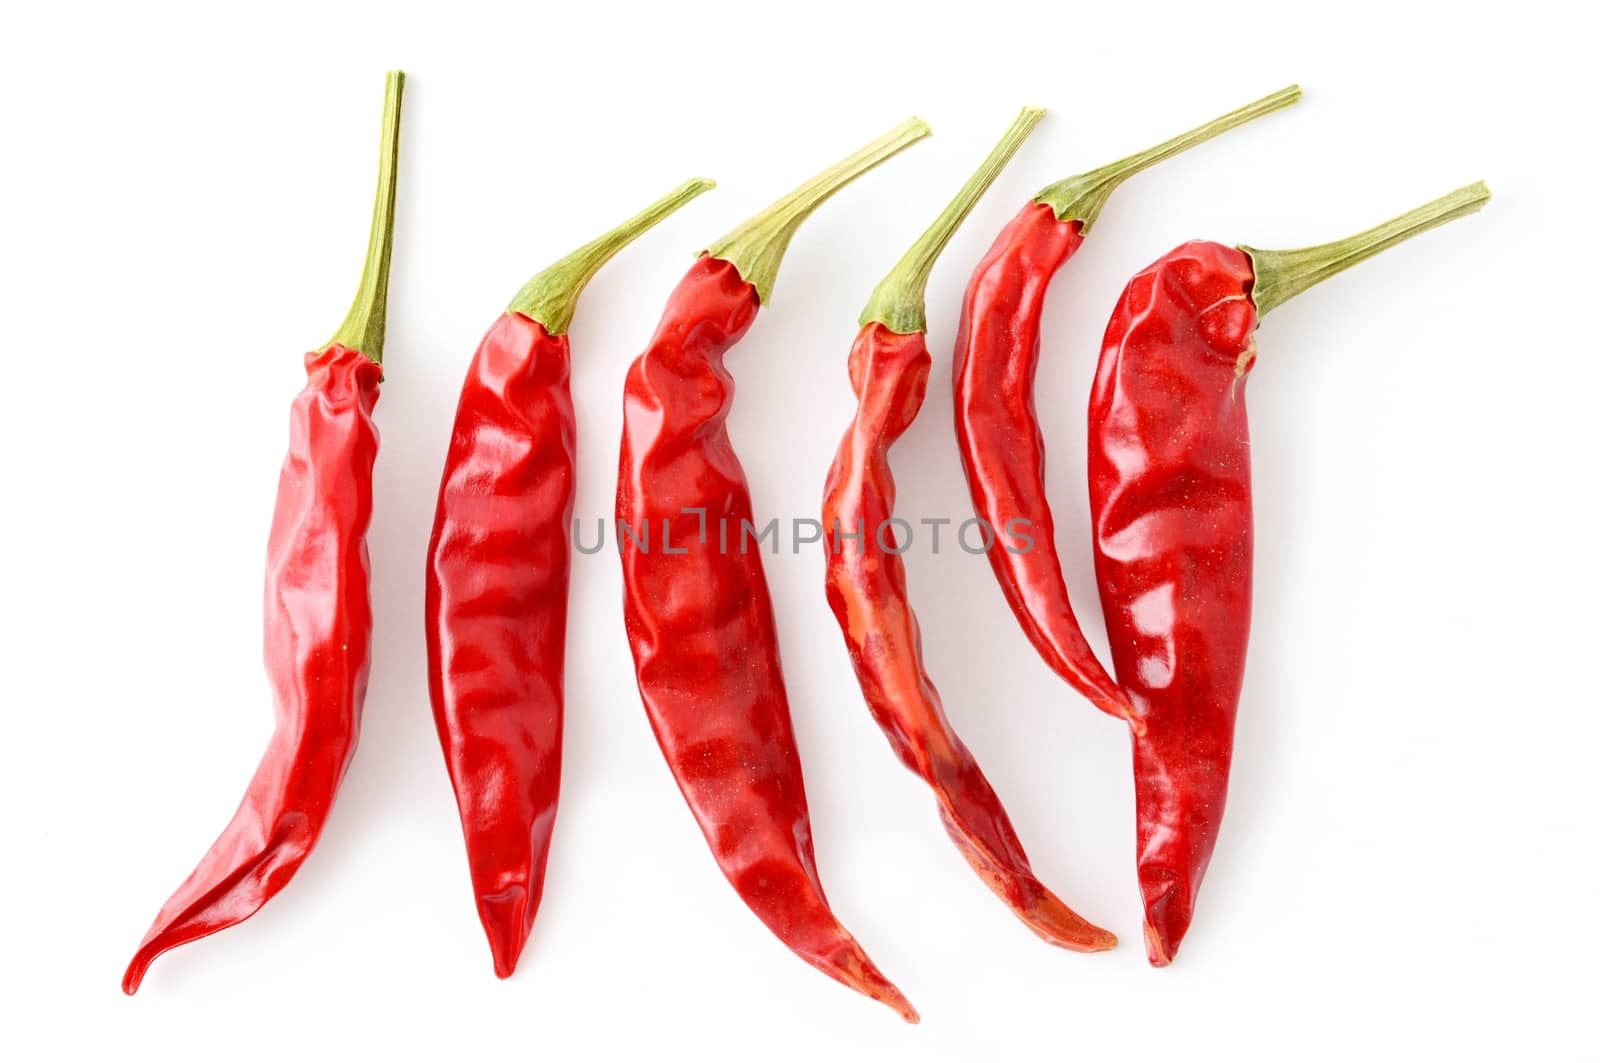 Dried red hot chilli peppers. by hamik